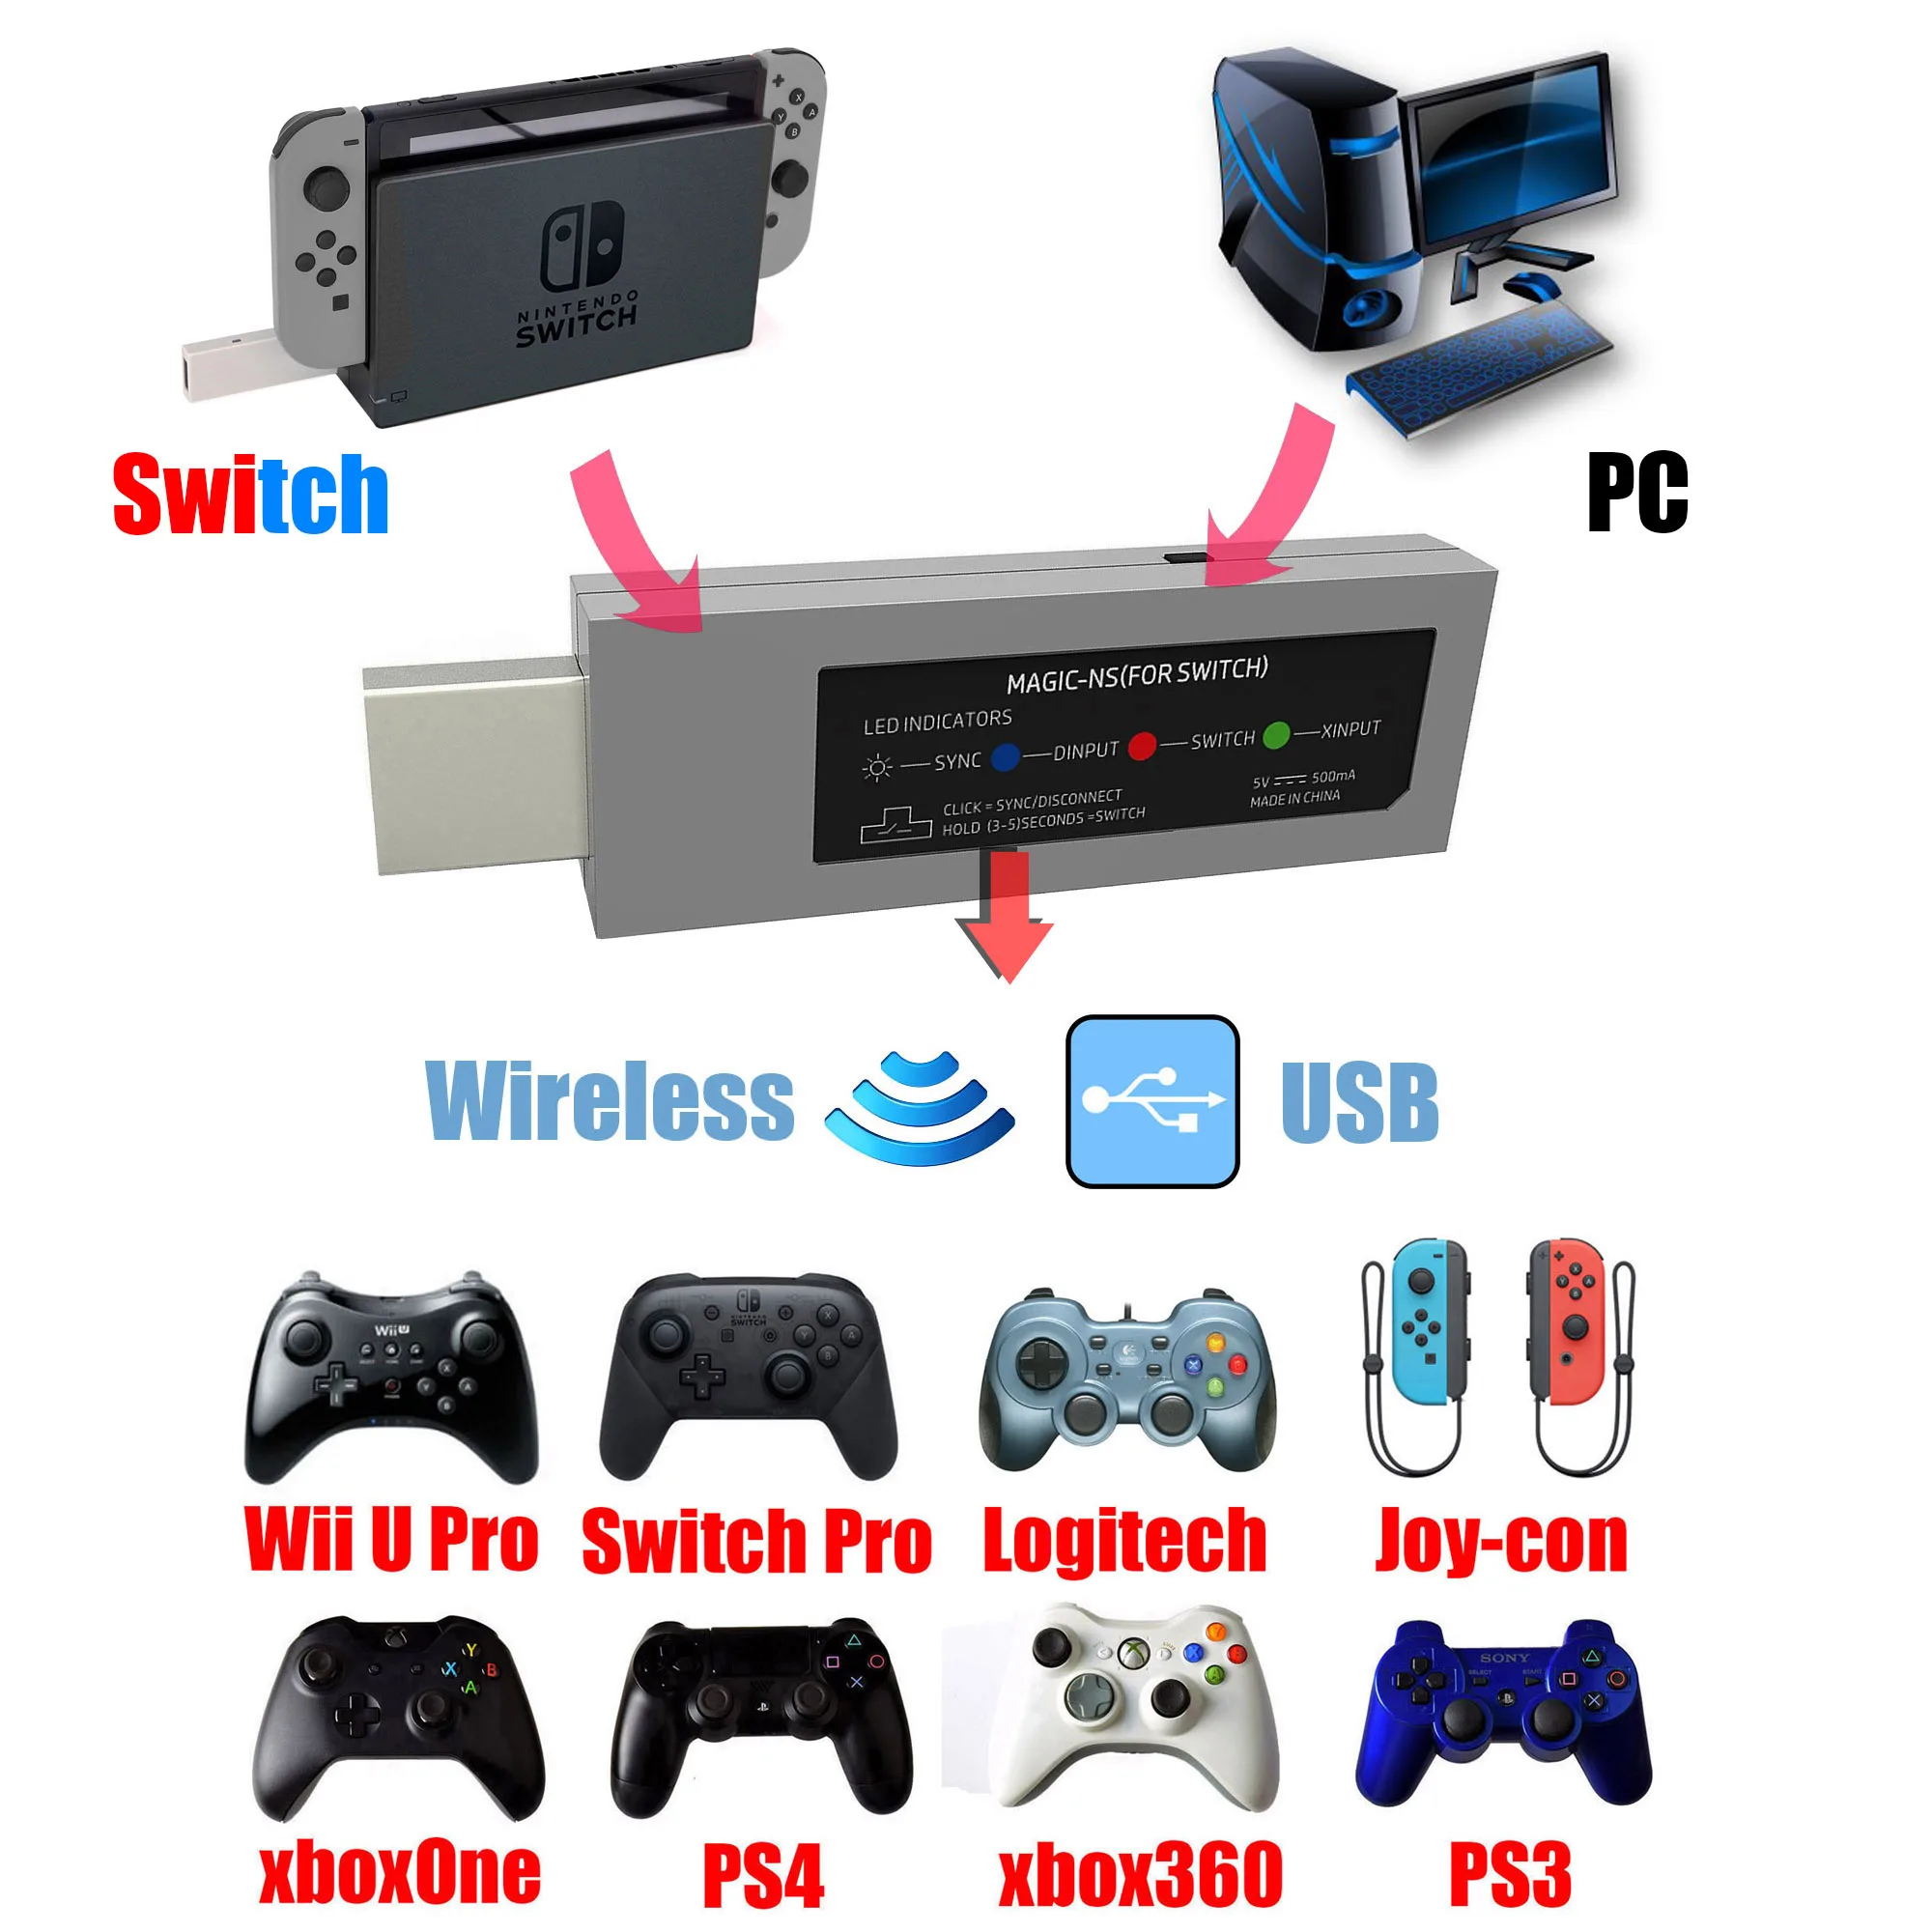 pair wii u pro controller to pc